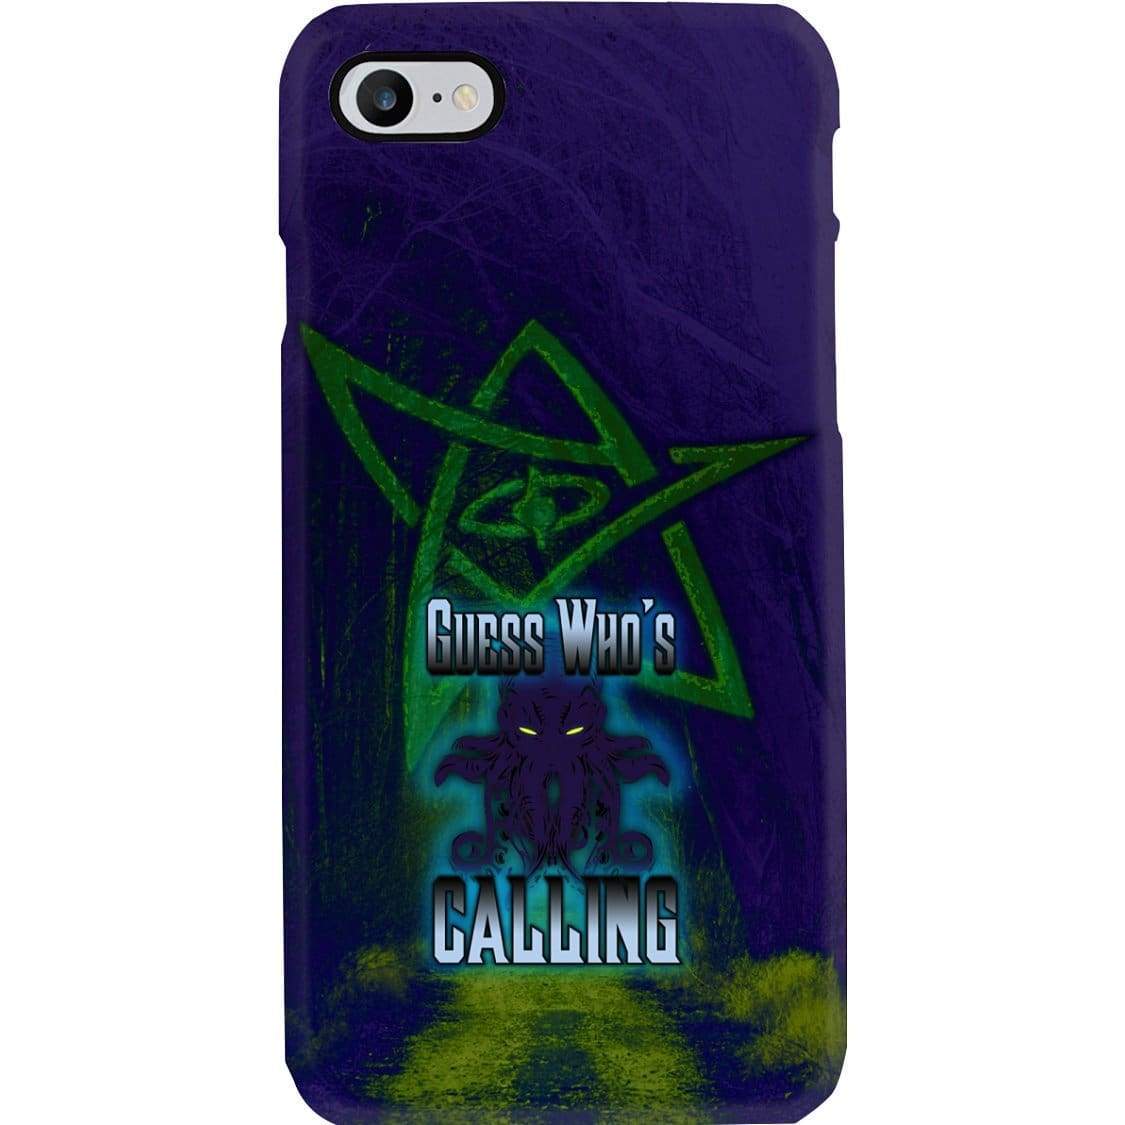 Cthulhu - Guess Who’s Calling Phone Case - Snap * iPhone * Samsung * - iPhone 7 Case / Gloss / Apparel